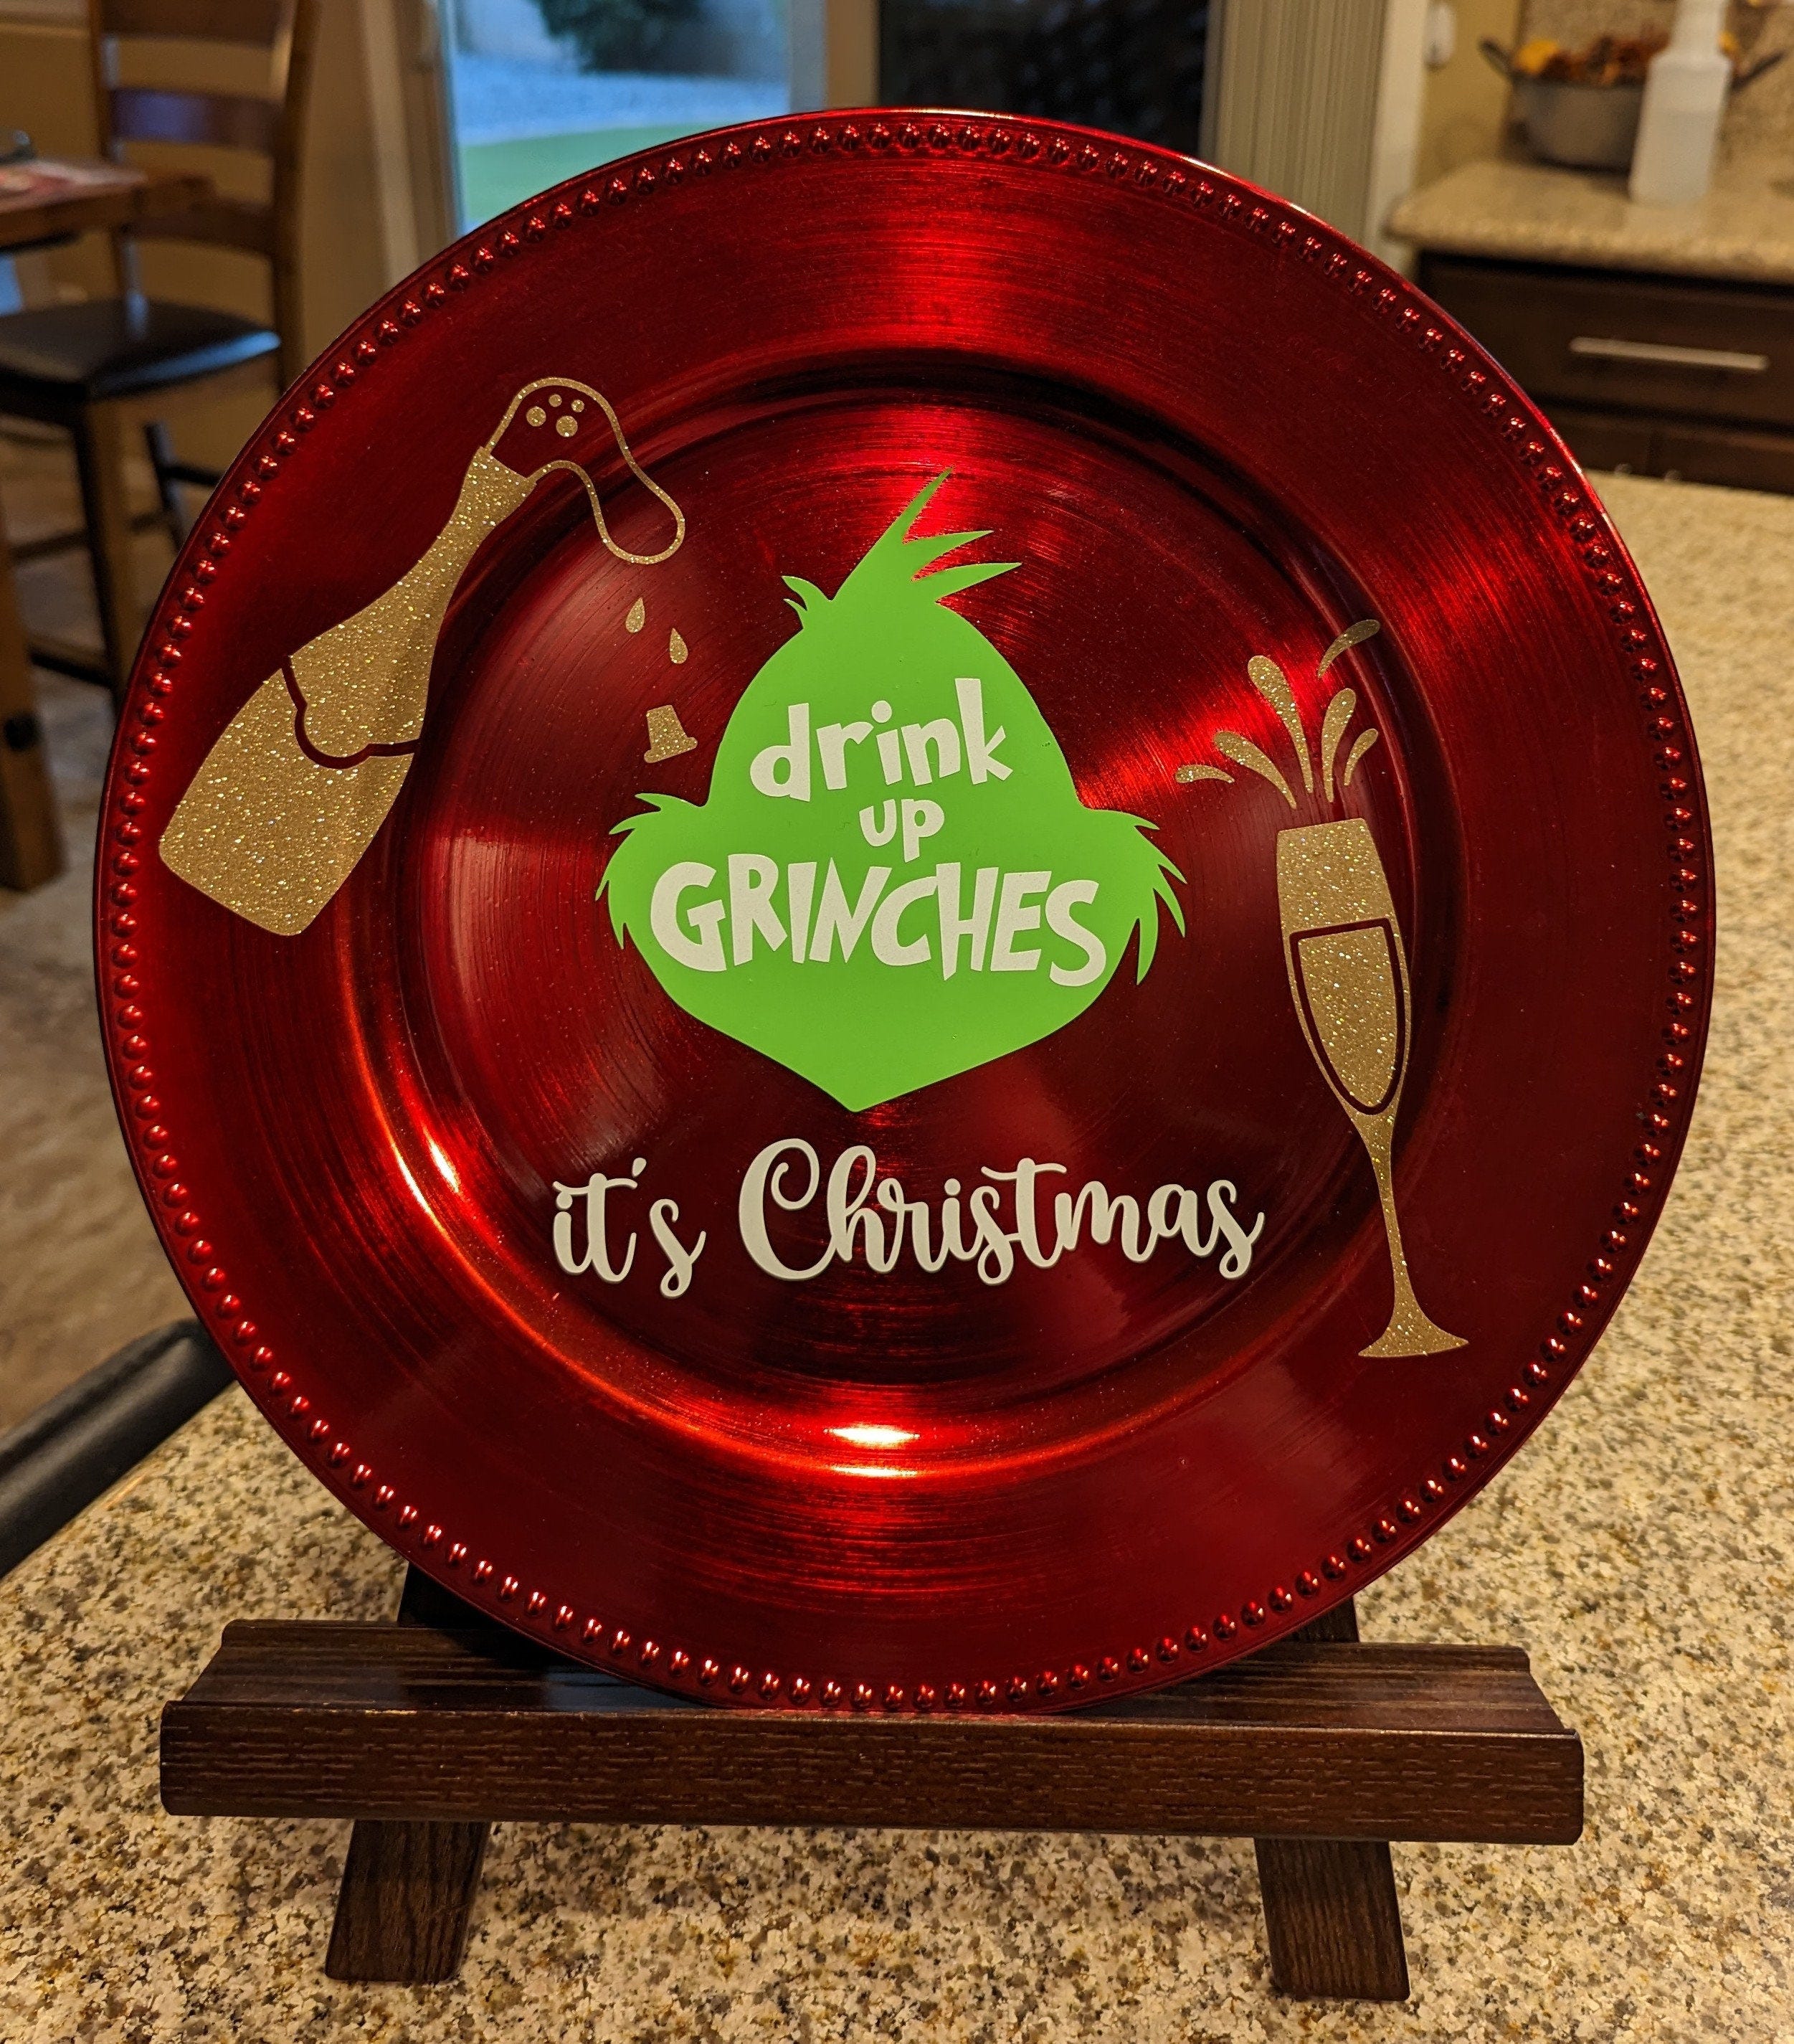 Drink up Grinches it